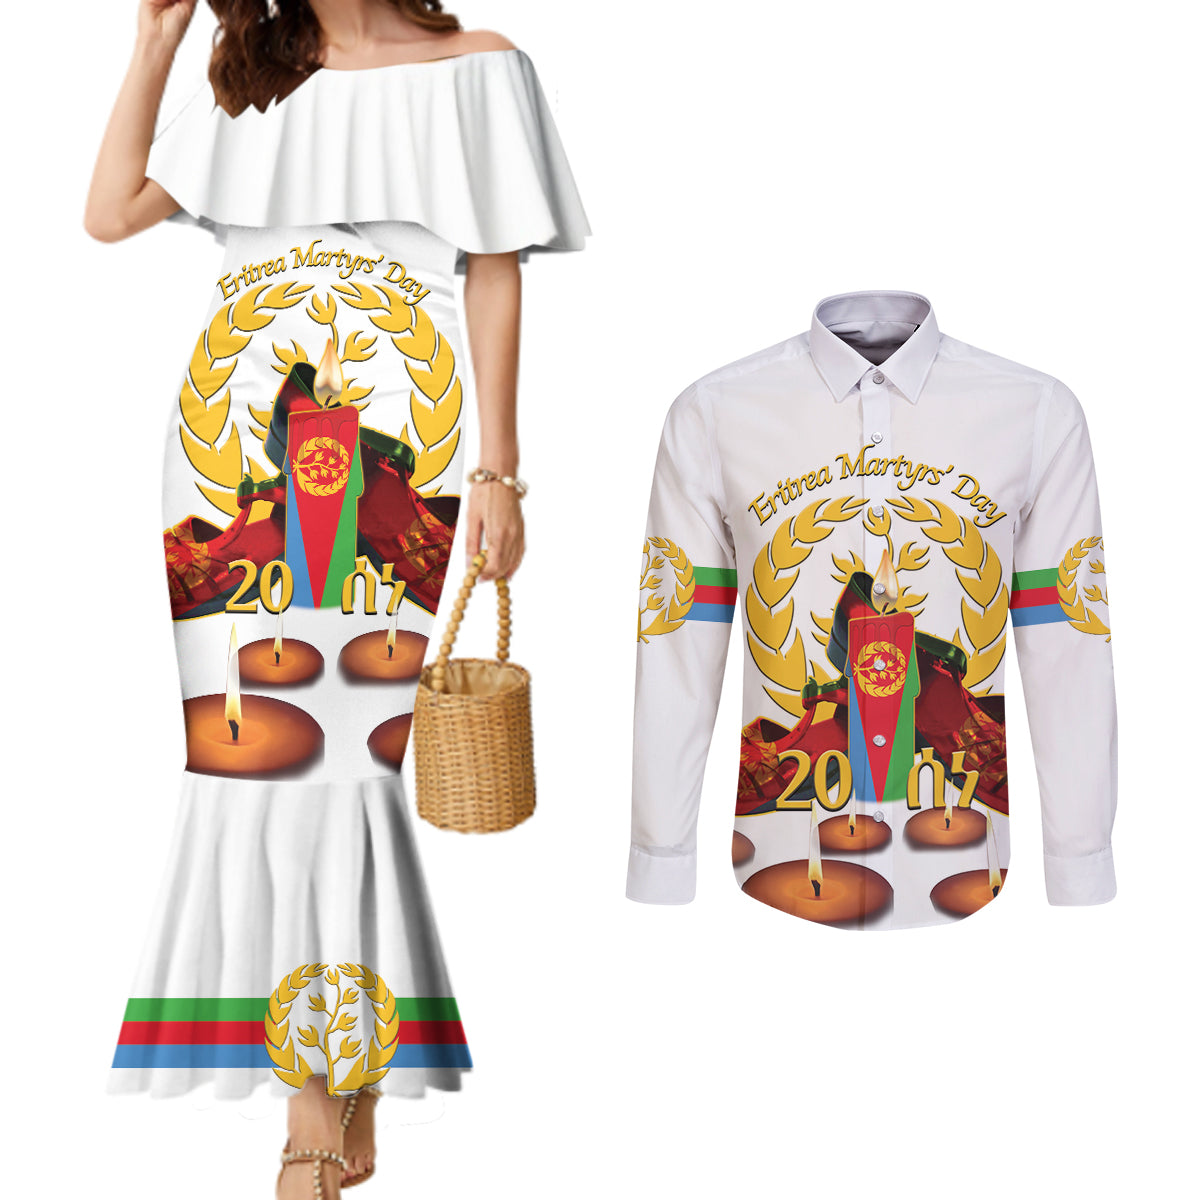 Custom Eritrea Martyrs' Day Couples Matching Mermaid Dress and Long Sleeve Button Shirt 20 June Shida Shoes With Candles - White